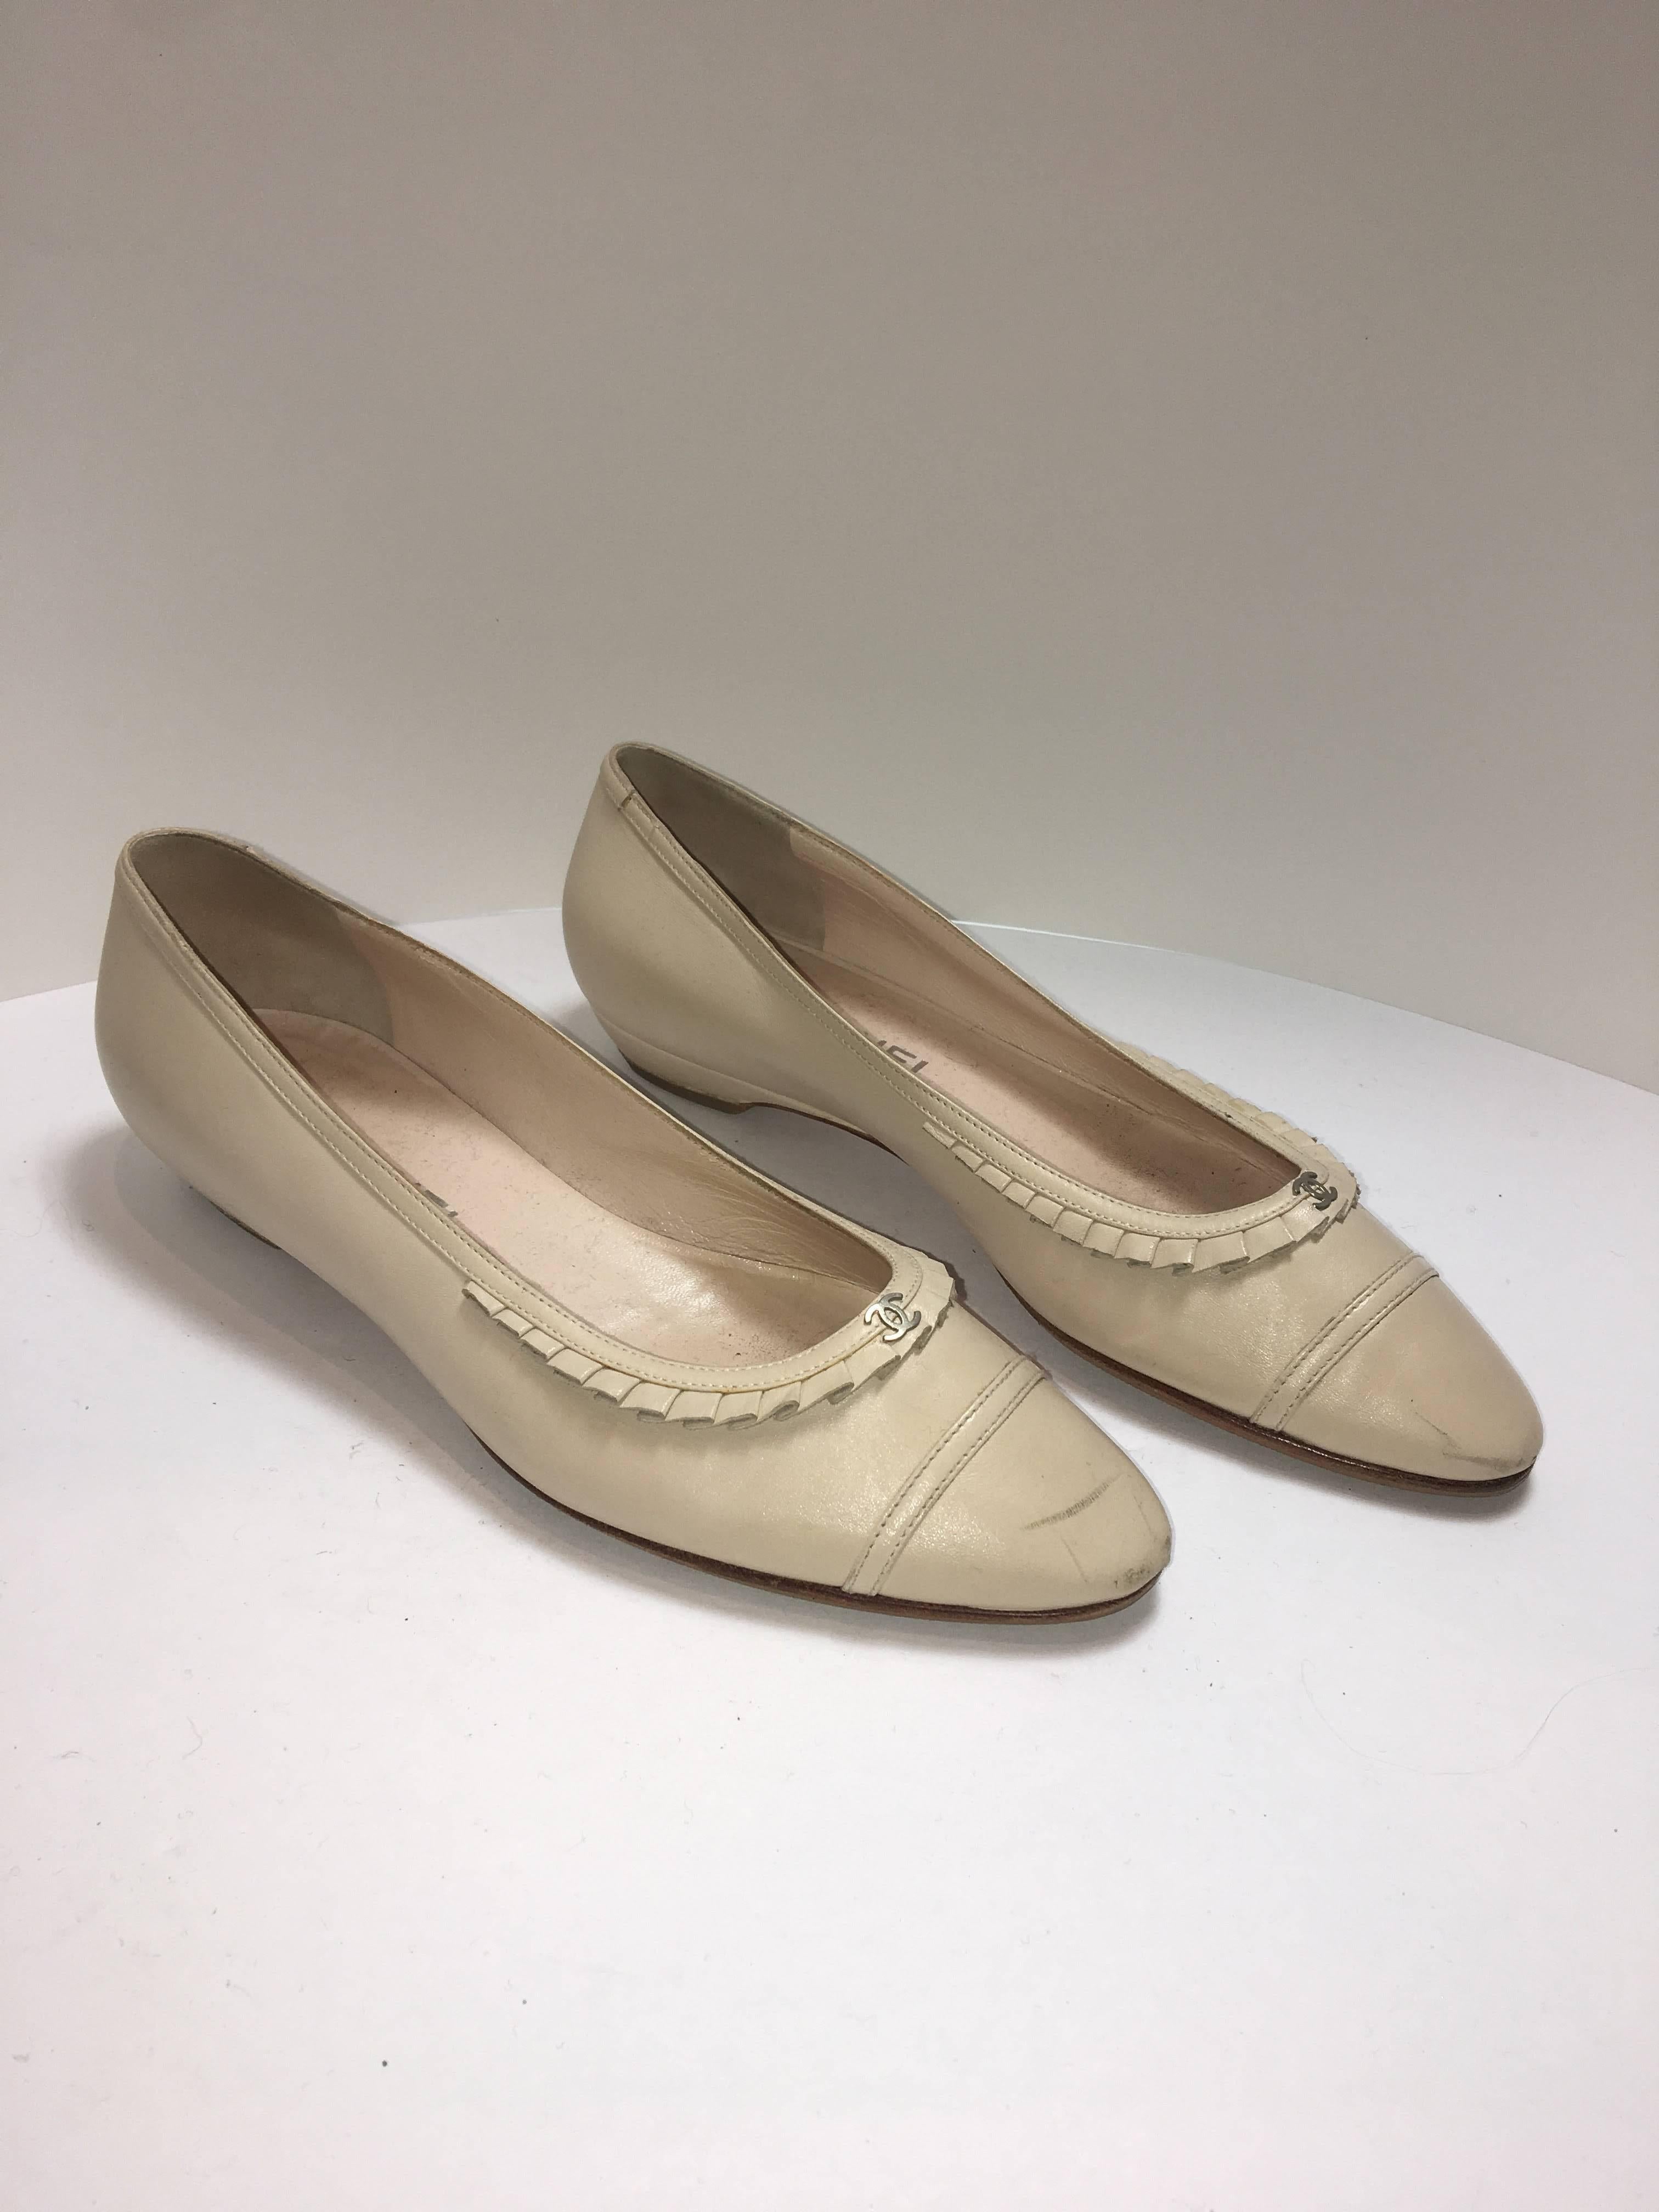 Chanel size 9.5 Flats. Beige Leather with Ruffle Detail.